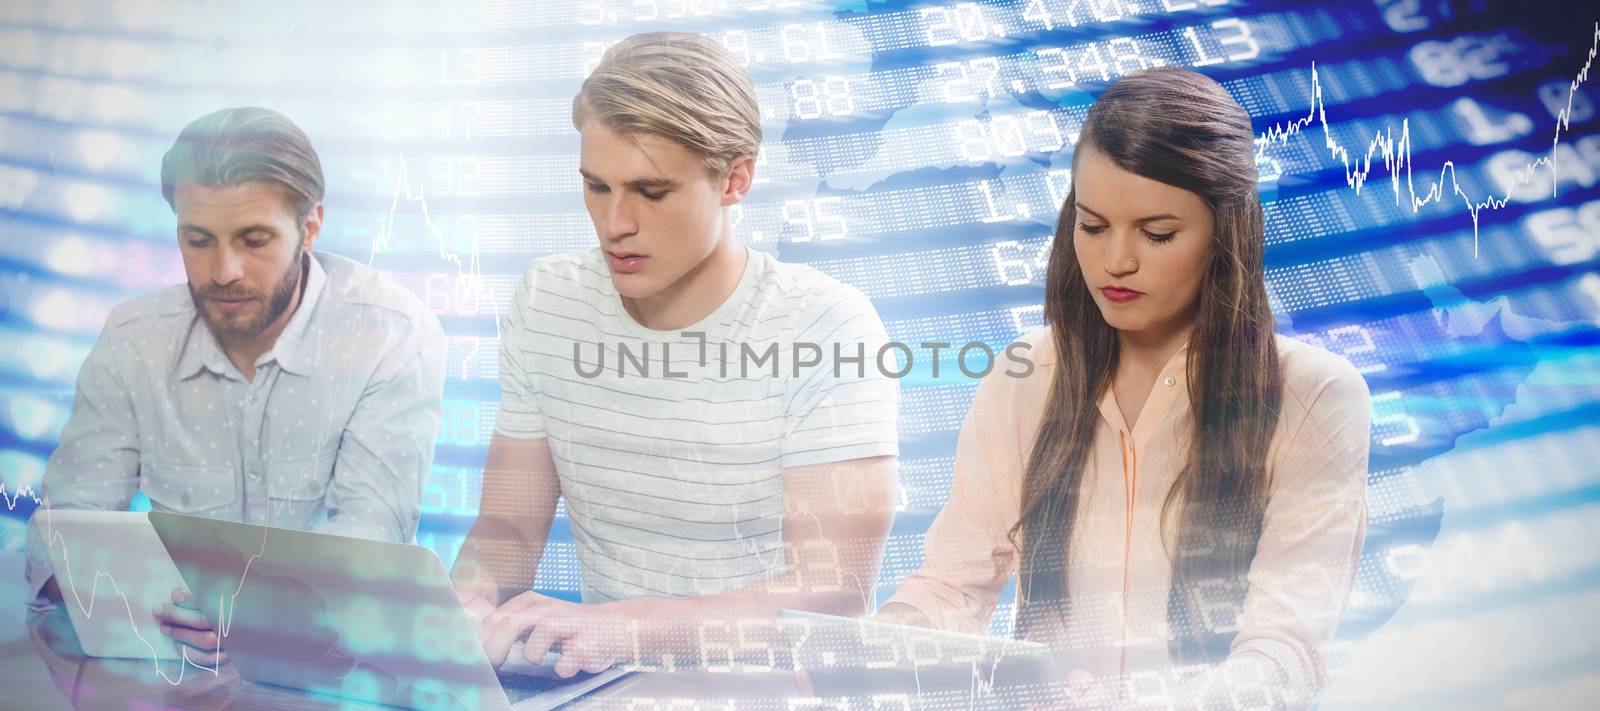 Composite image of focused business people using technology against white background by Wavebreakmedia